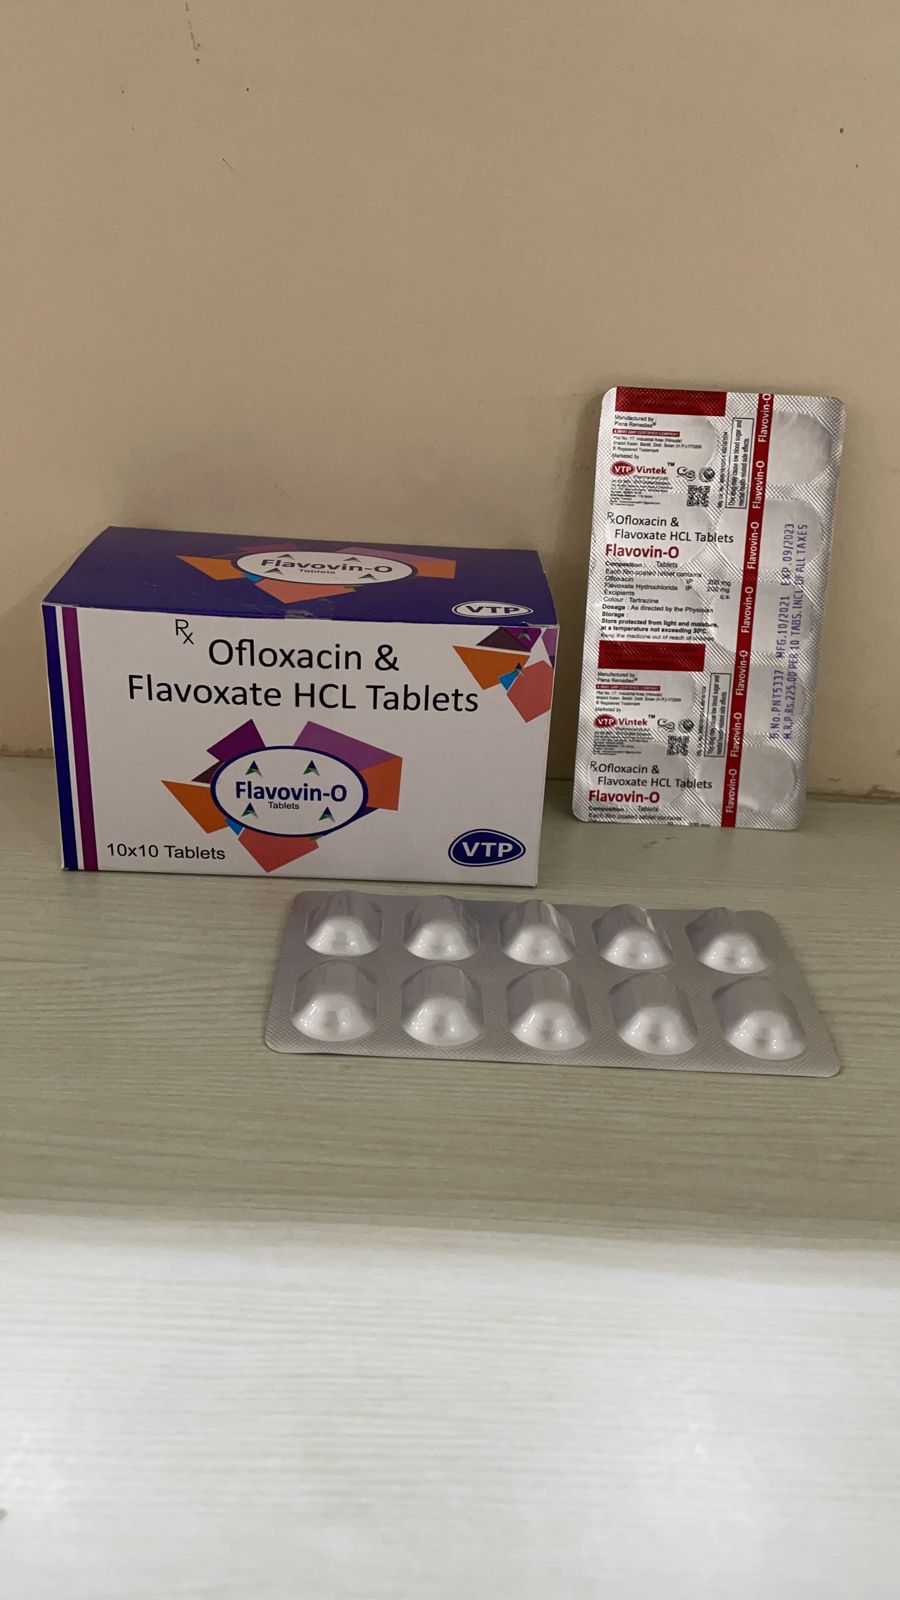 FLAVOVIN-O Tablets